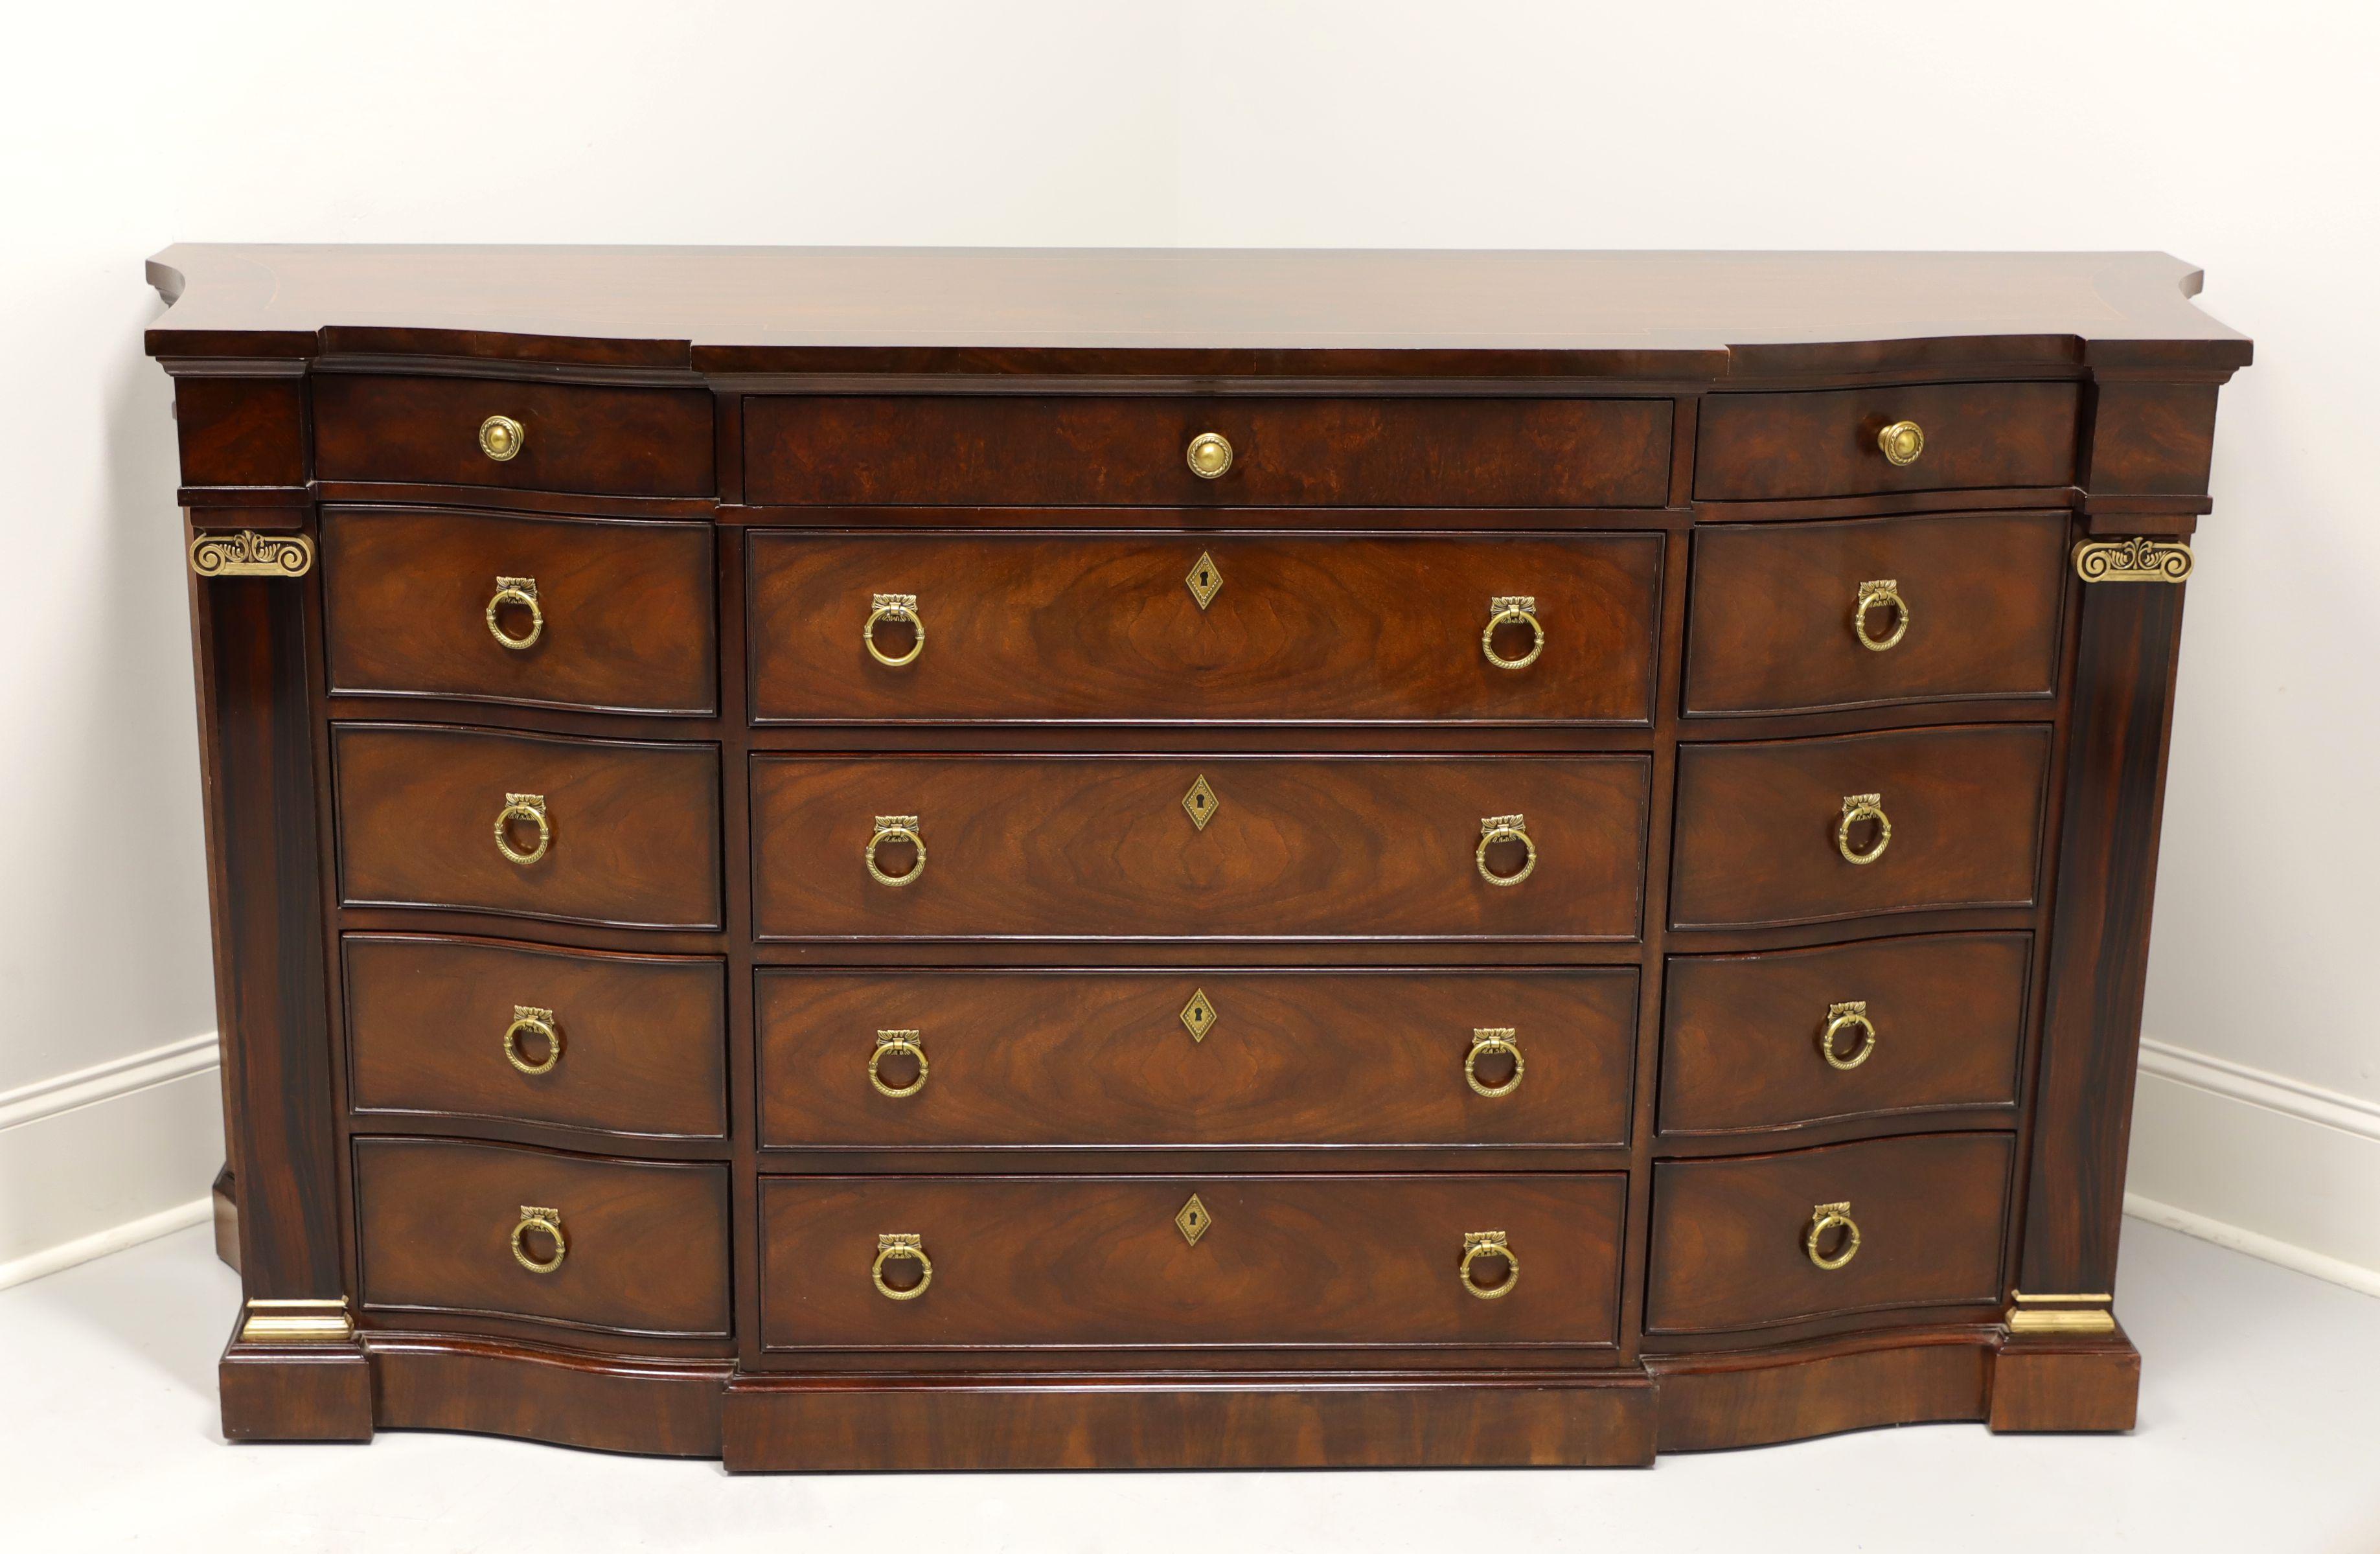 A monumentally sized, Regency style, dresser by Henredon. Mahogany and veneers with brass hardware, banded top, columned sides with gold painted caps and a serpentine front. Features fifteen various size drawers with faux lockplates on four center